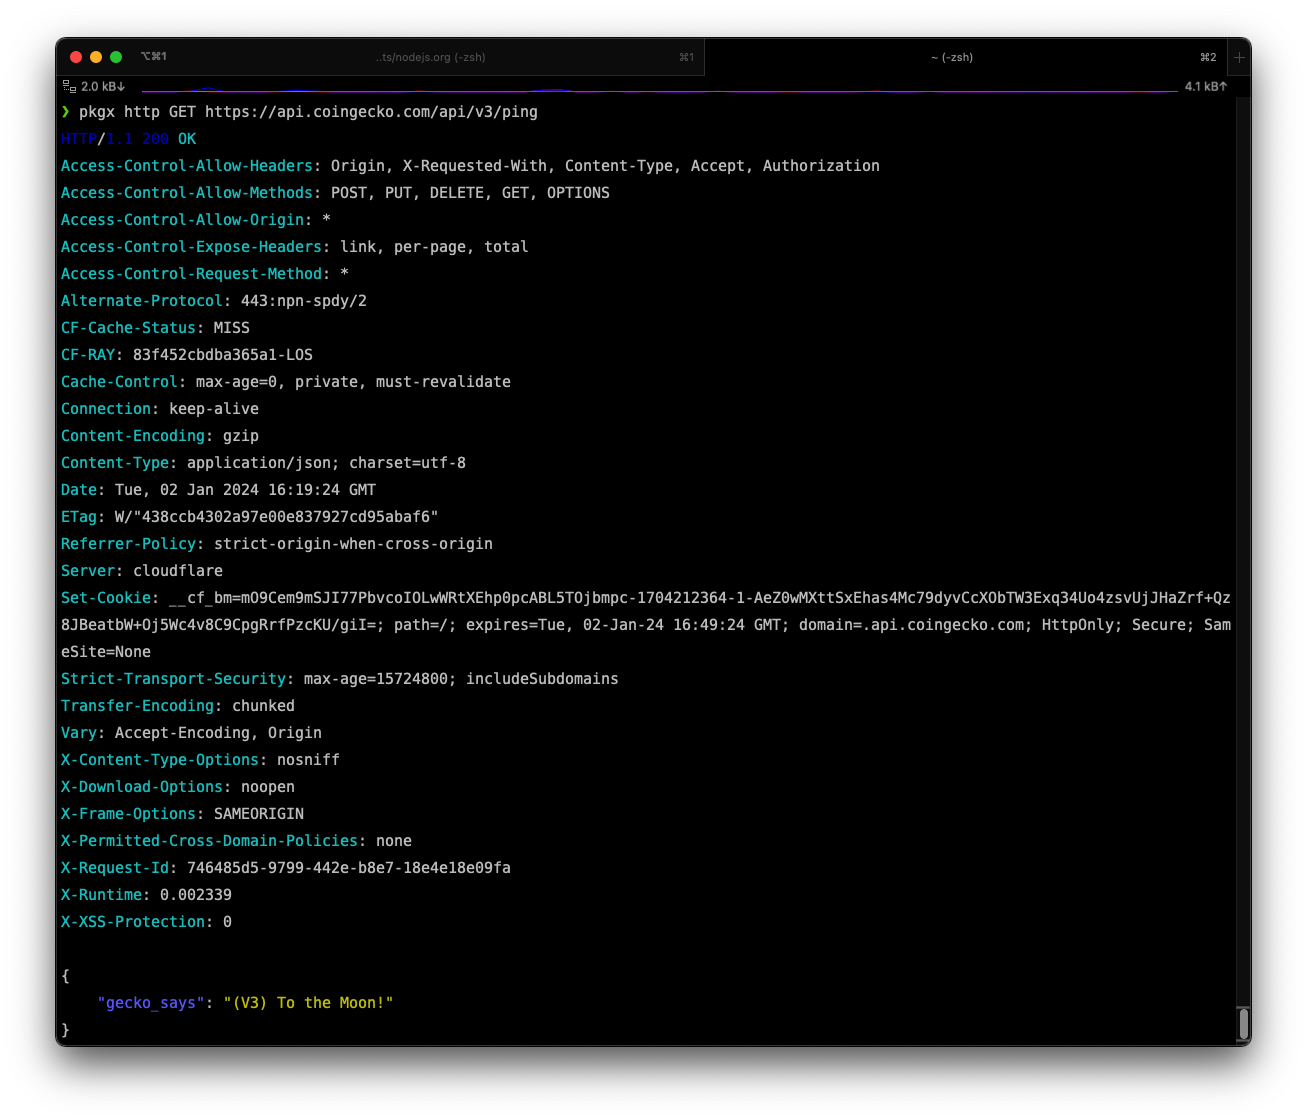 Image of the httpie CLI tool in action